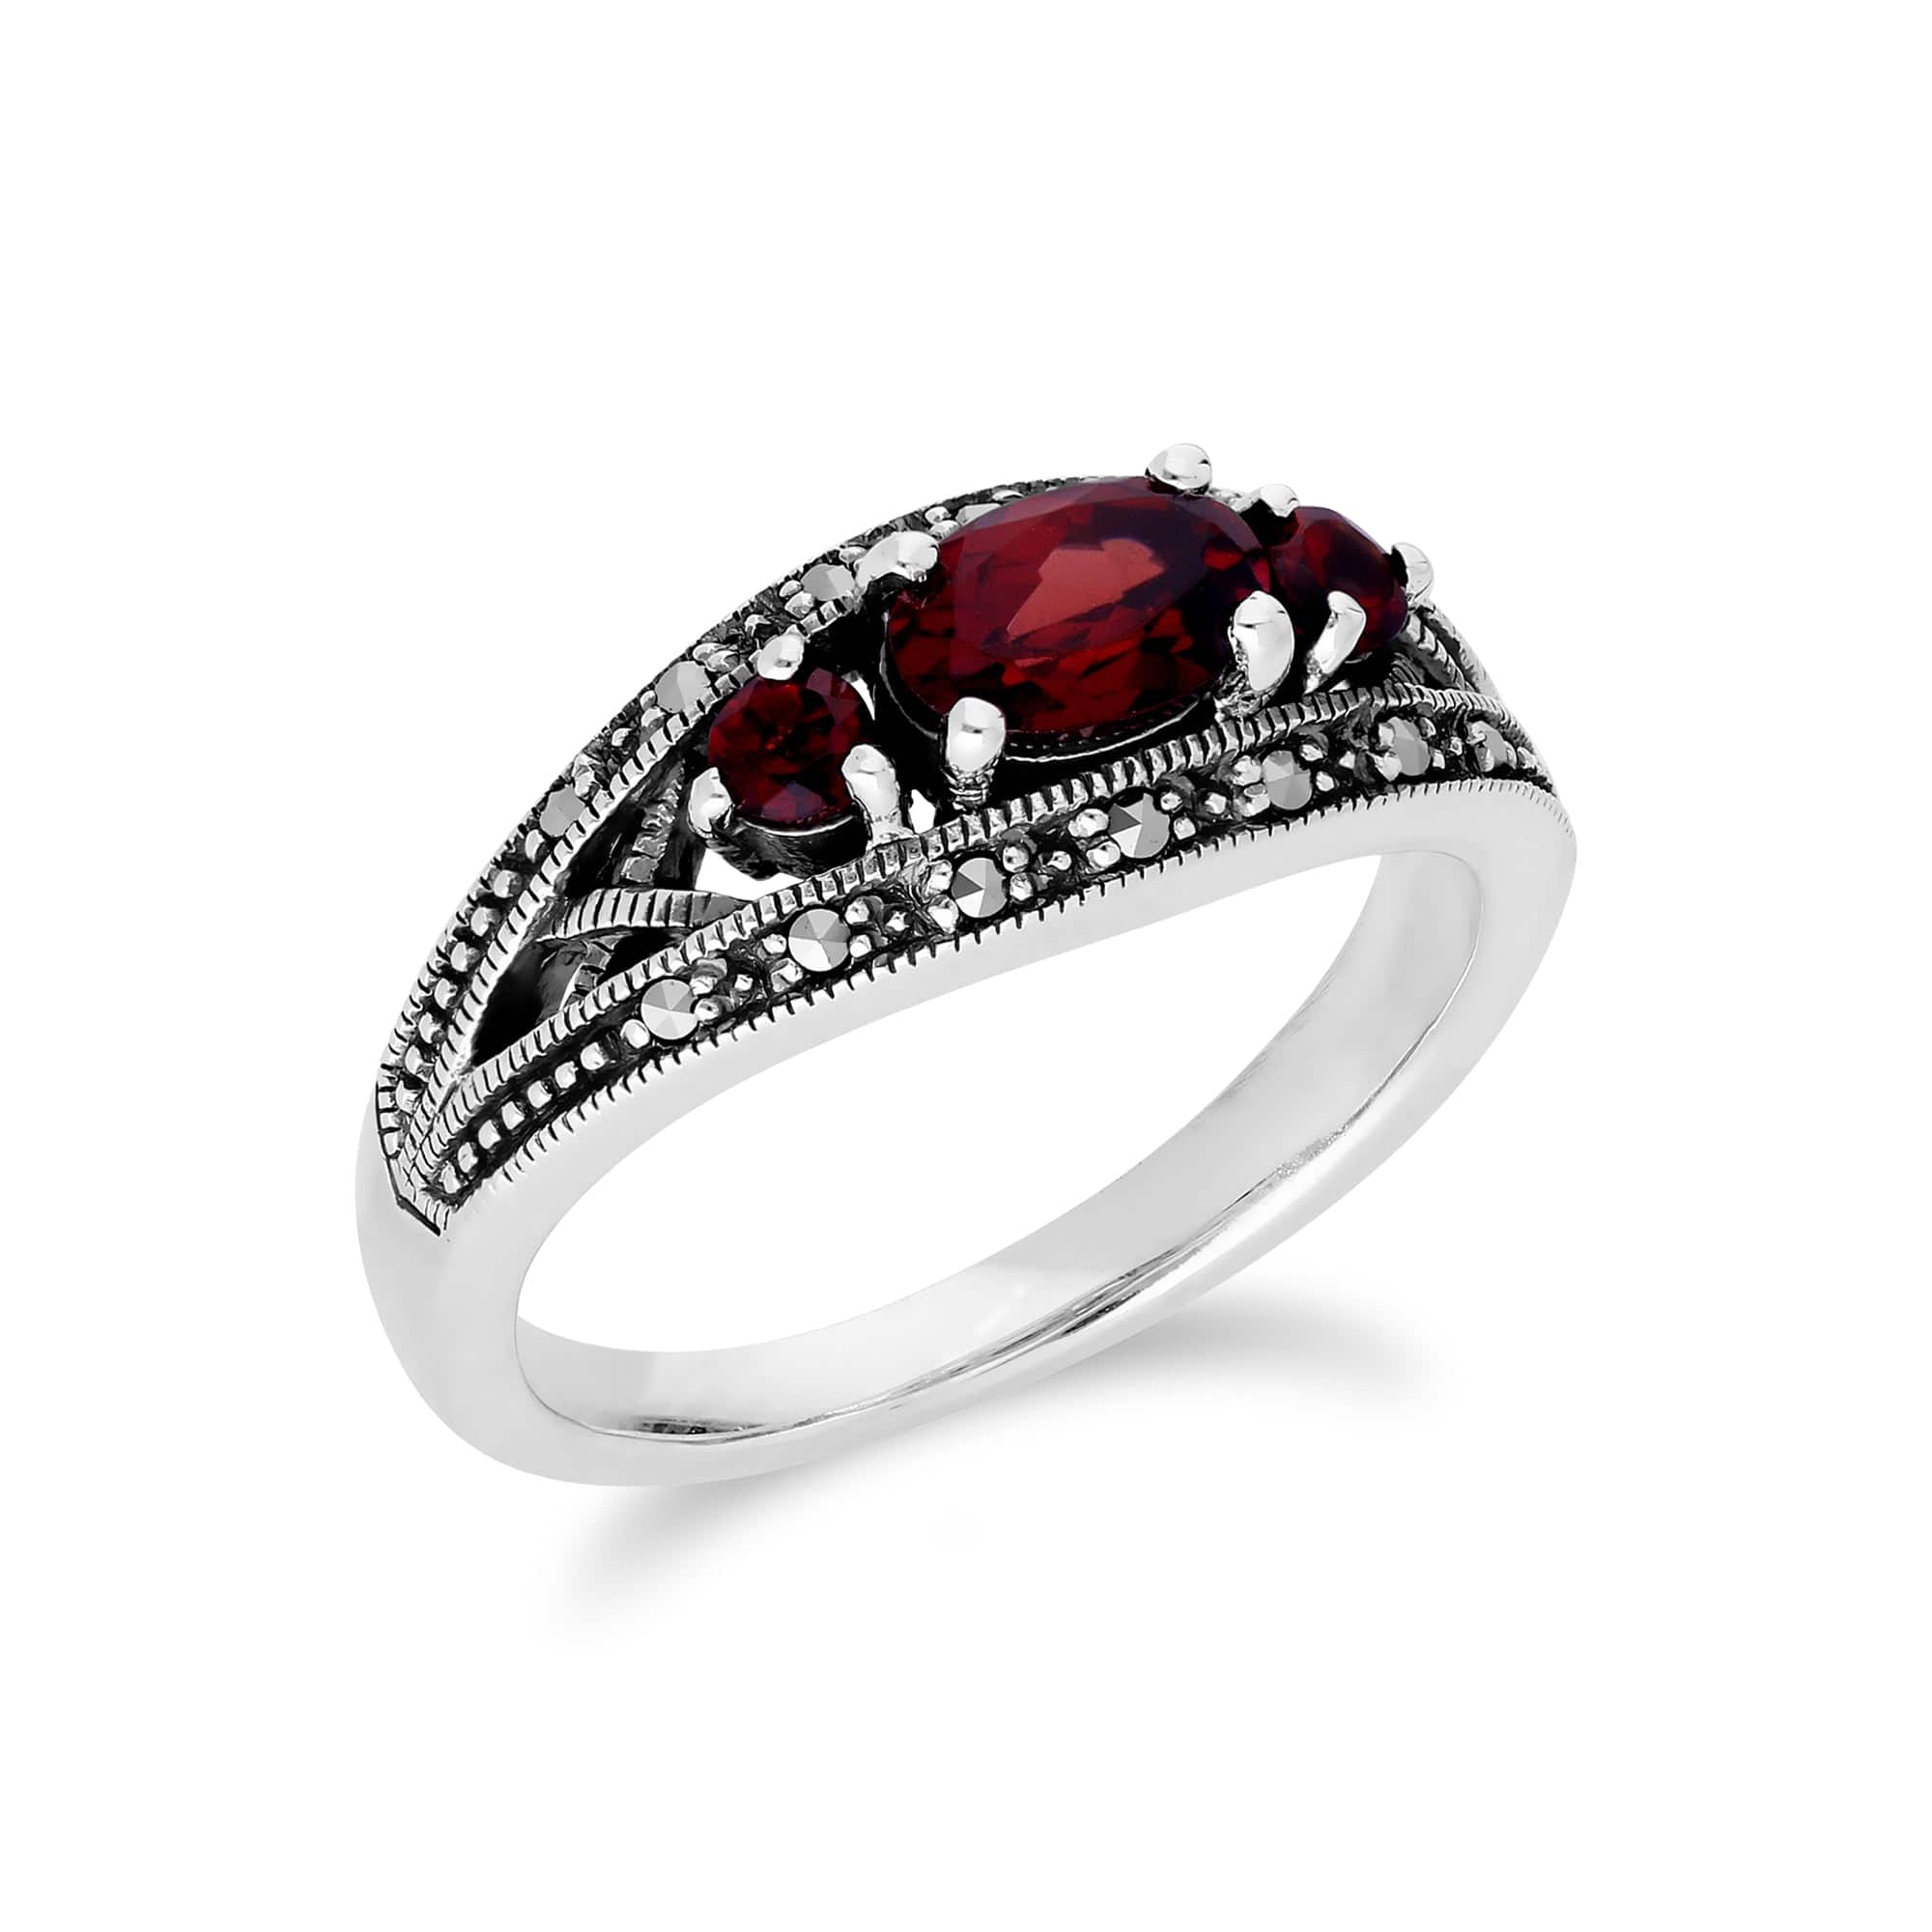 214R424002925 Art Deco Style Oval Garnet & Marcasite Three Stone Ring in 925 Sterling Silver 2